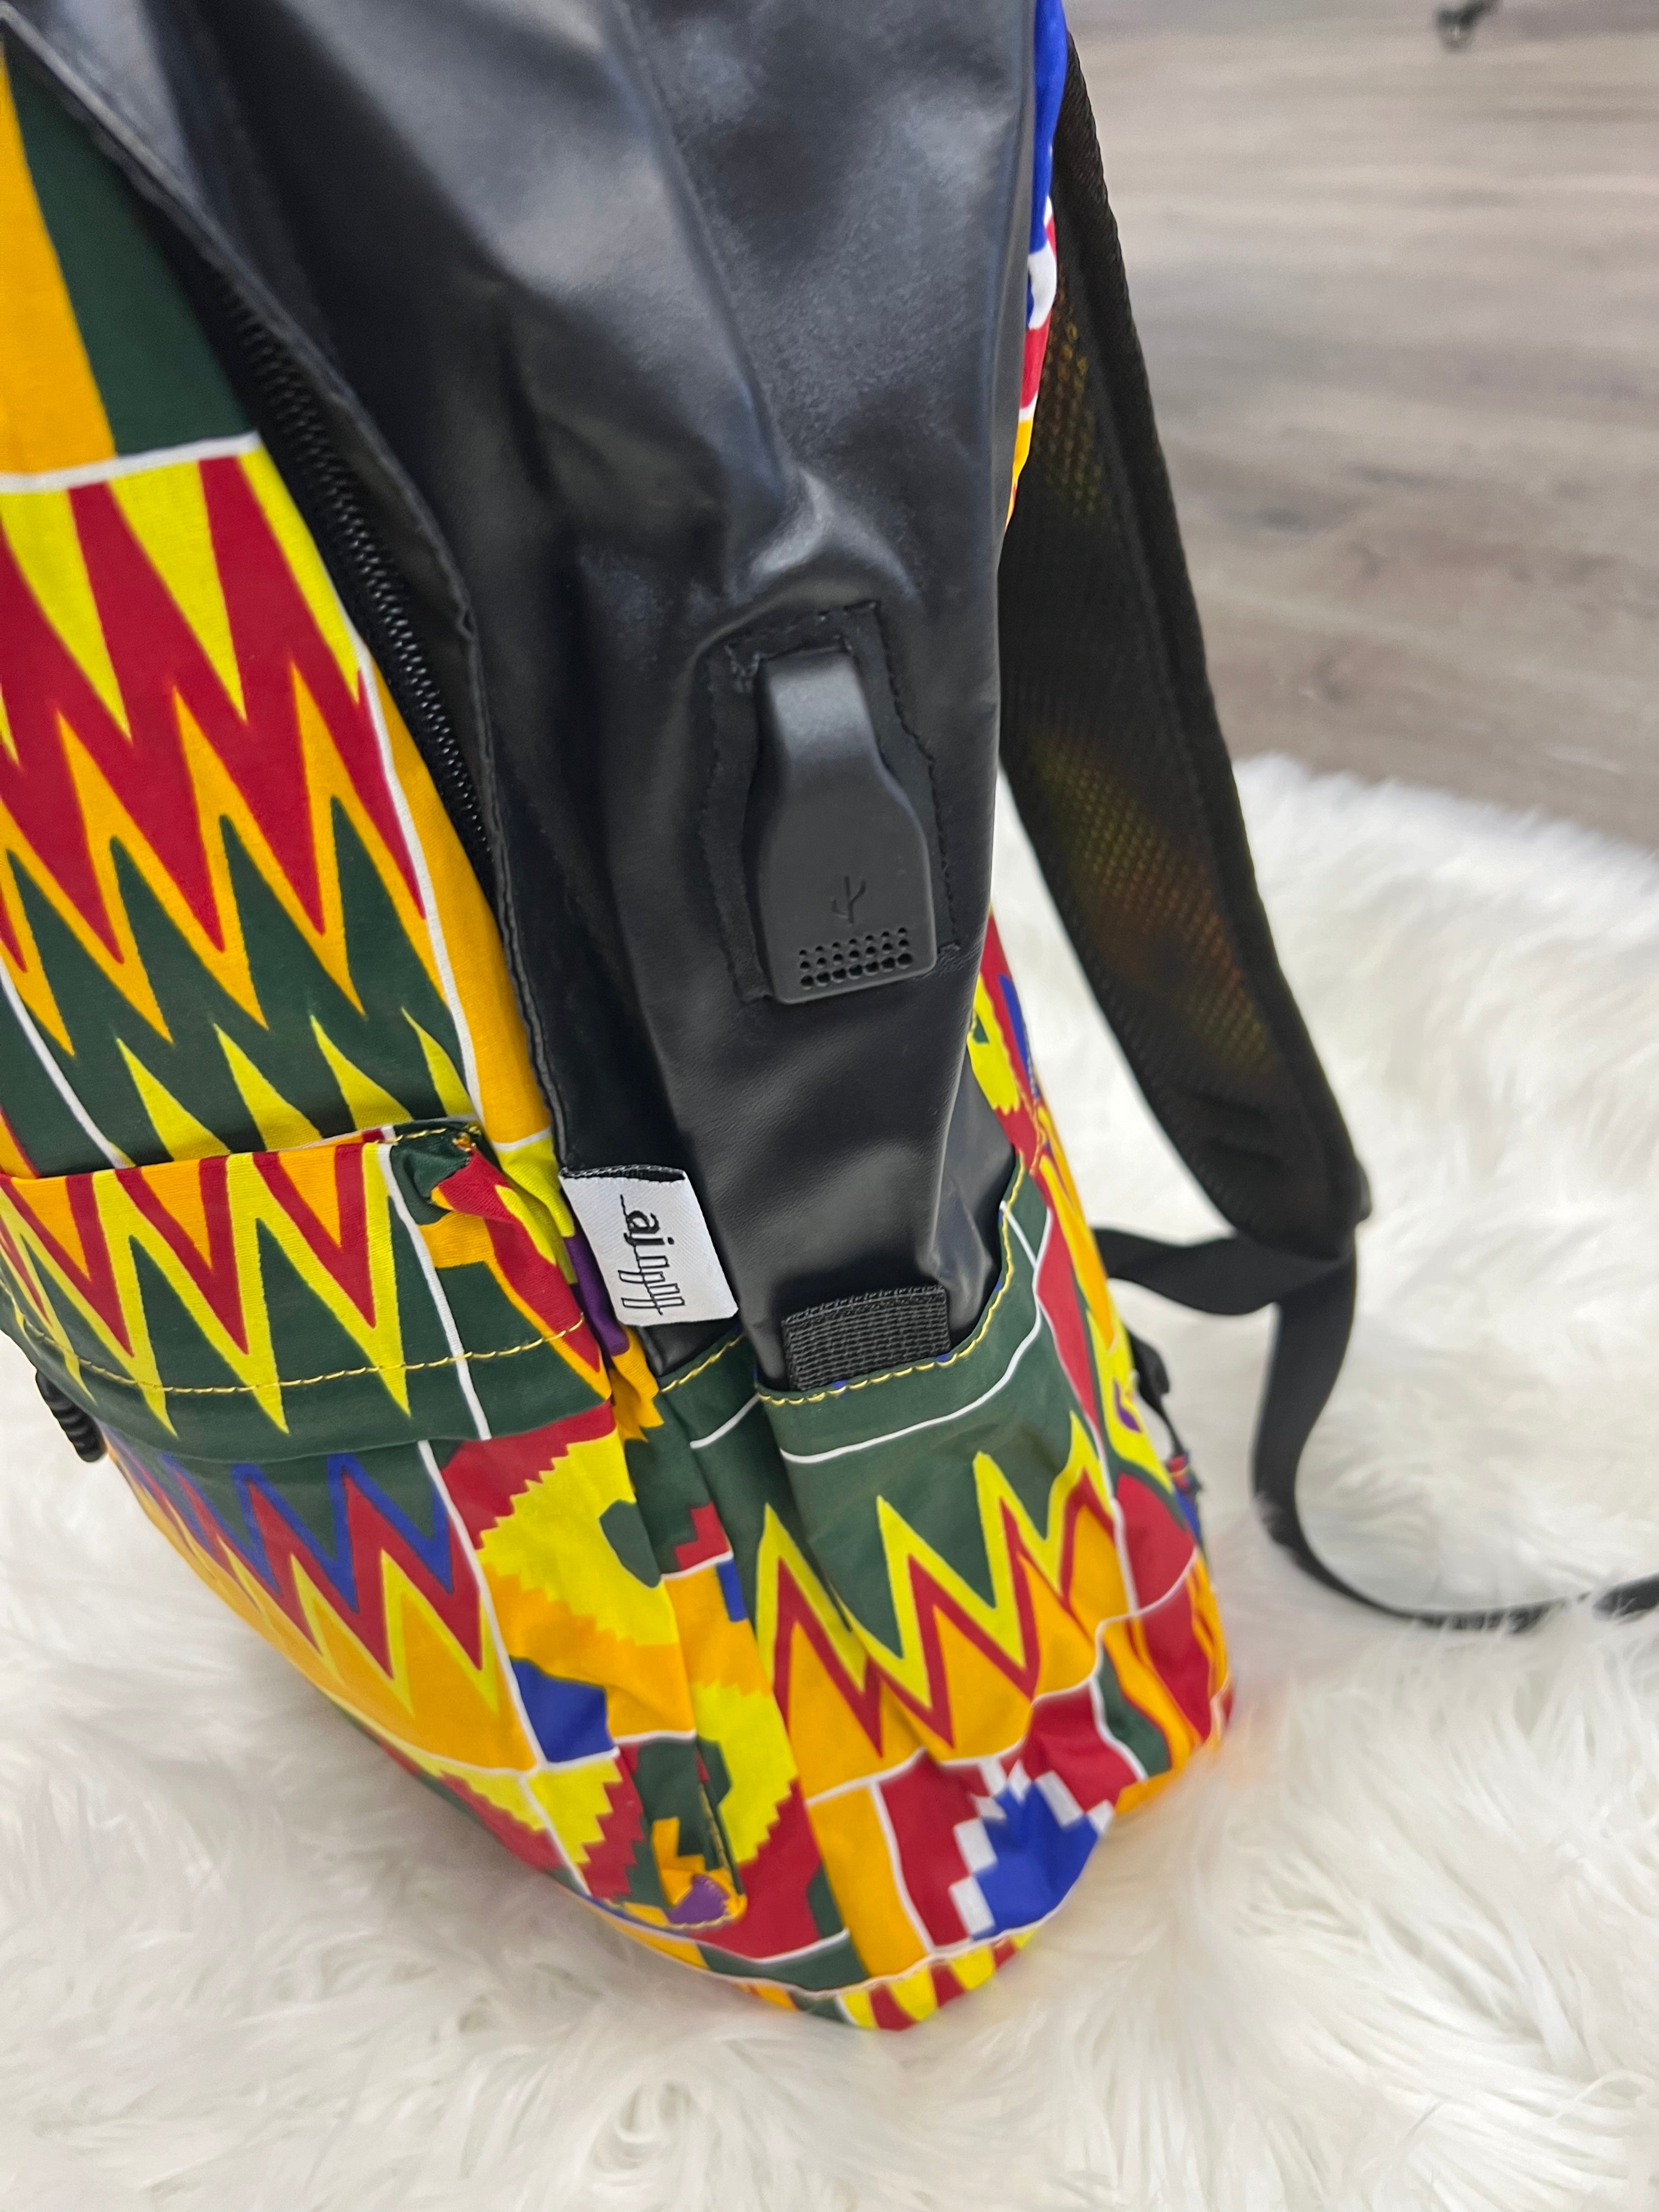 Multicolored Backpack